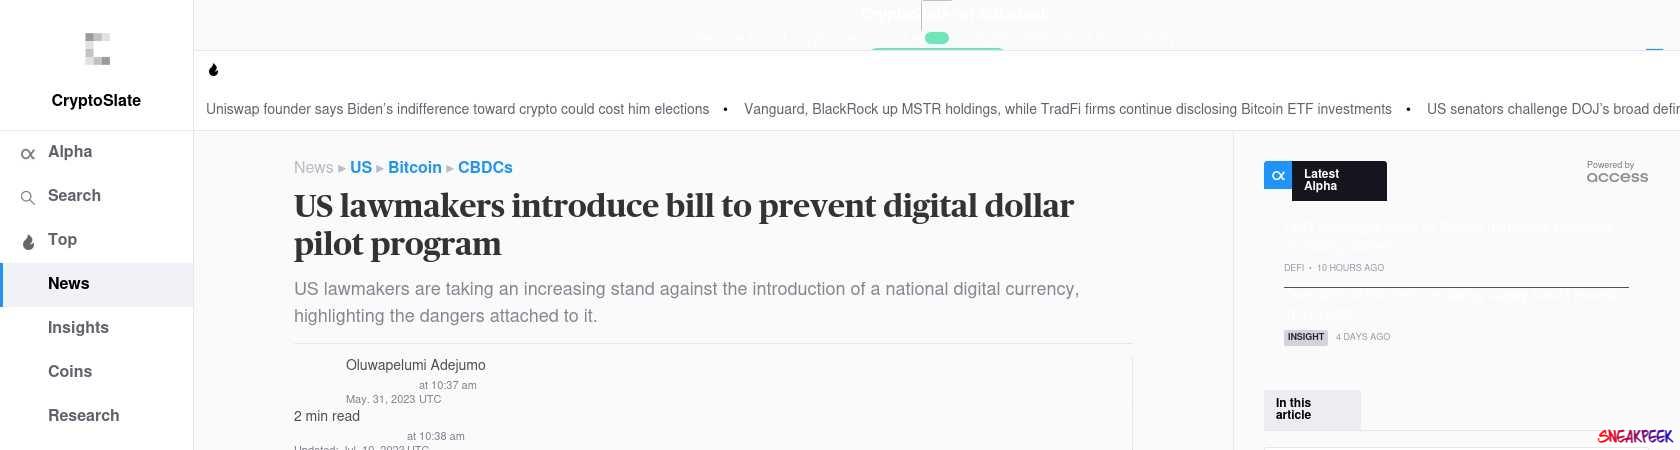 Read the full Article:  ⭲ US lawmakers introduce bill to prevent digital dollar pilot program